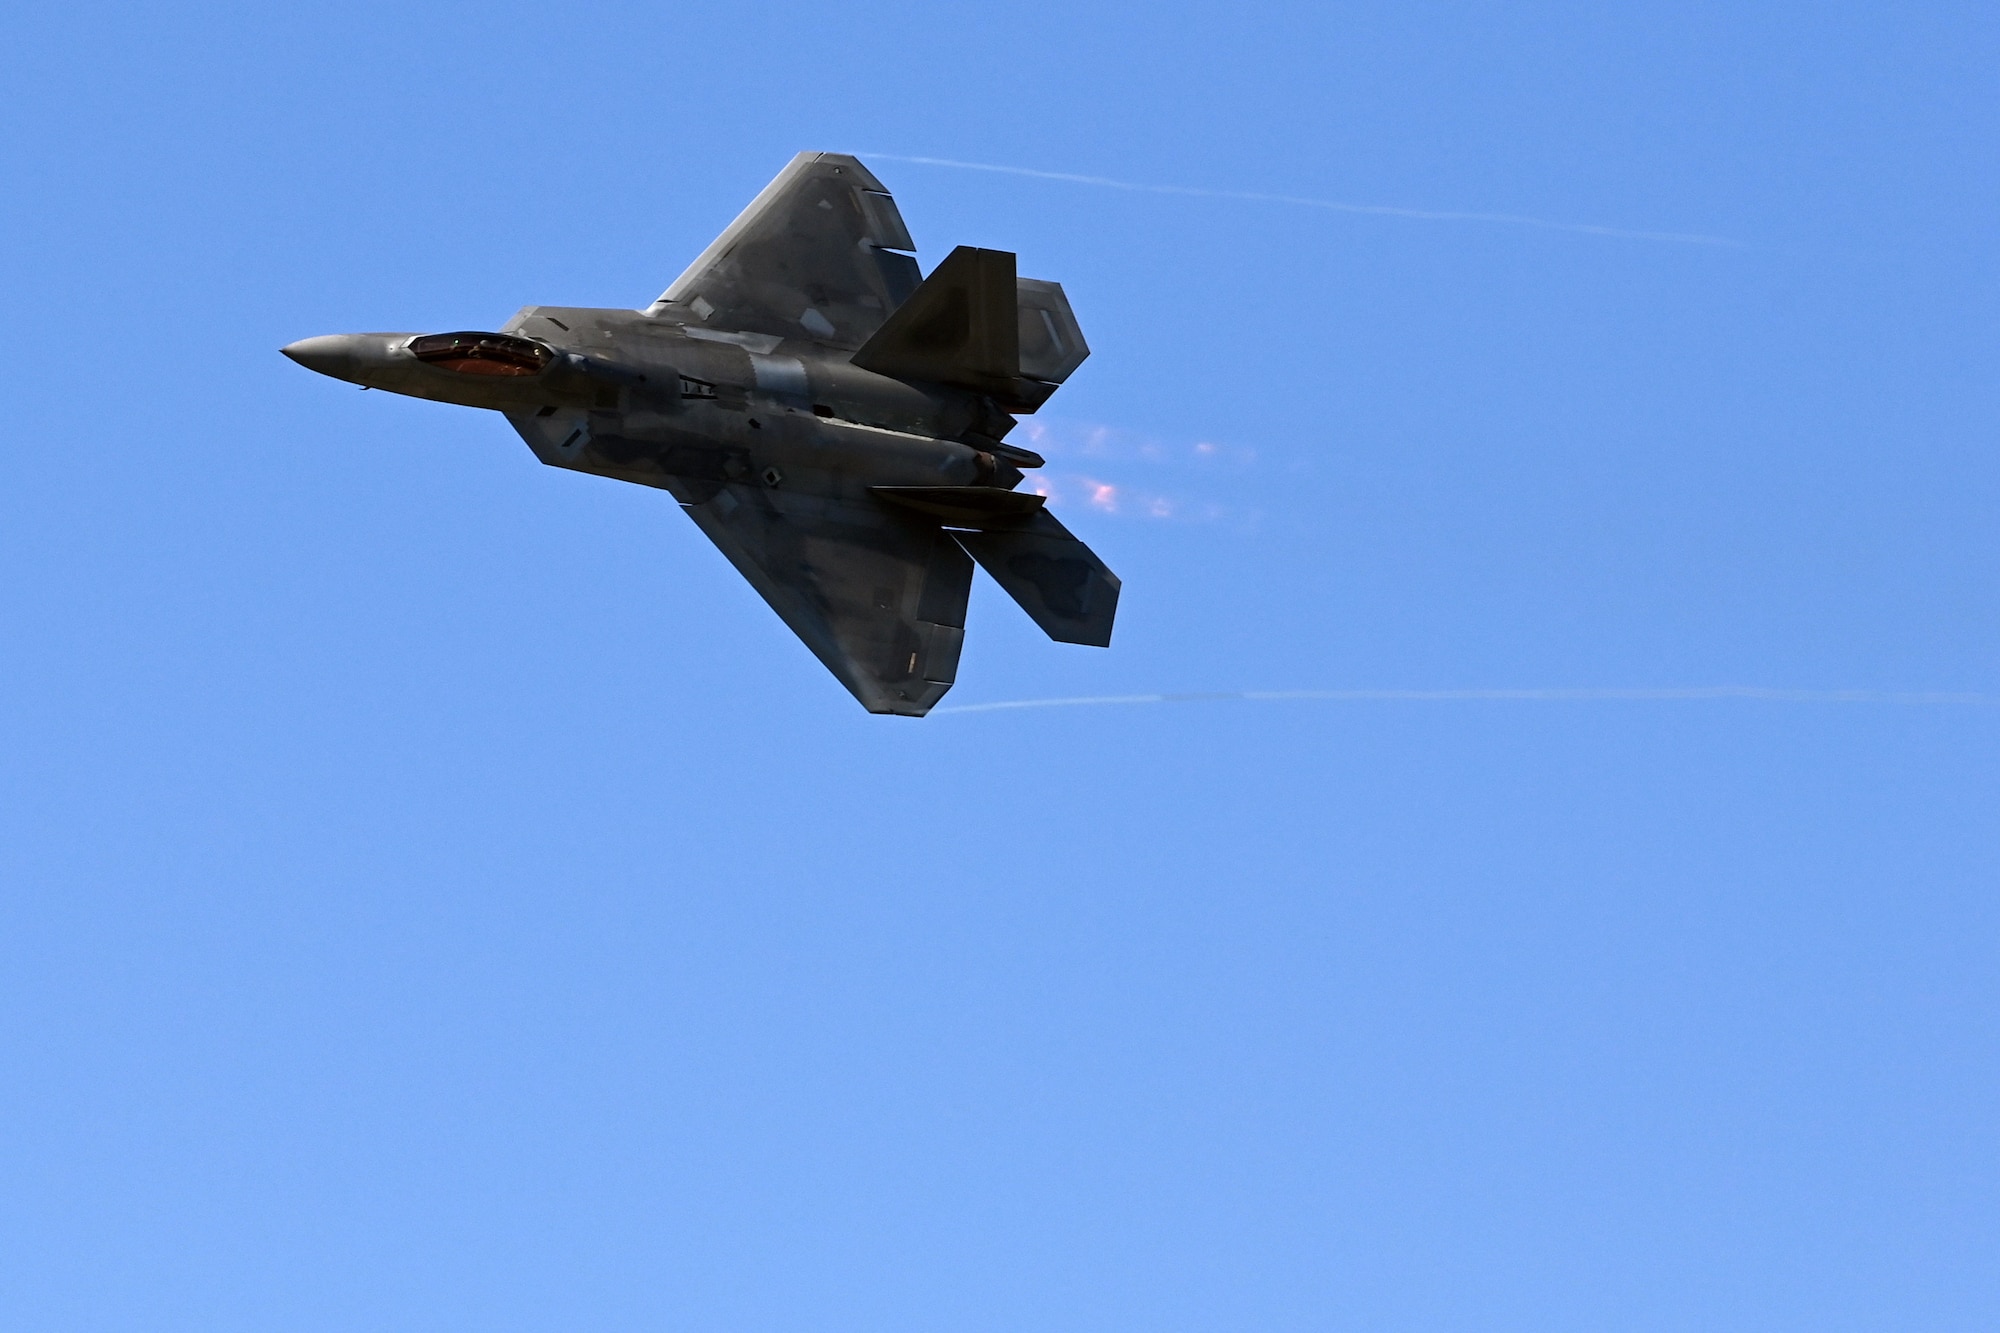 A U.S. Air Force F-22 Raptor performs maneuvers during a demonstration at the 2023 Seoul International Aerospace and Defense Exhibition media day at Seoul Air Base, Republic of Korea, Oct. 16, 2023.